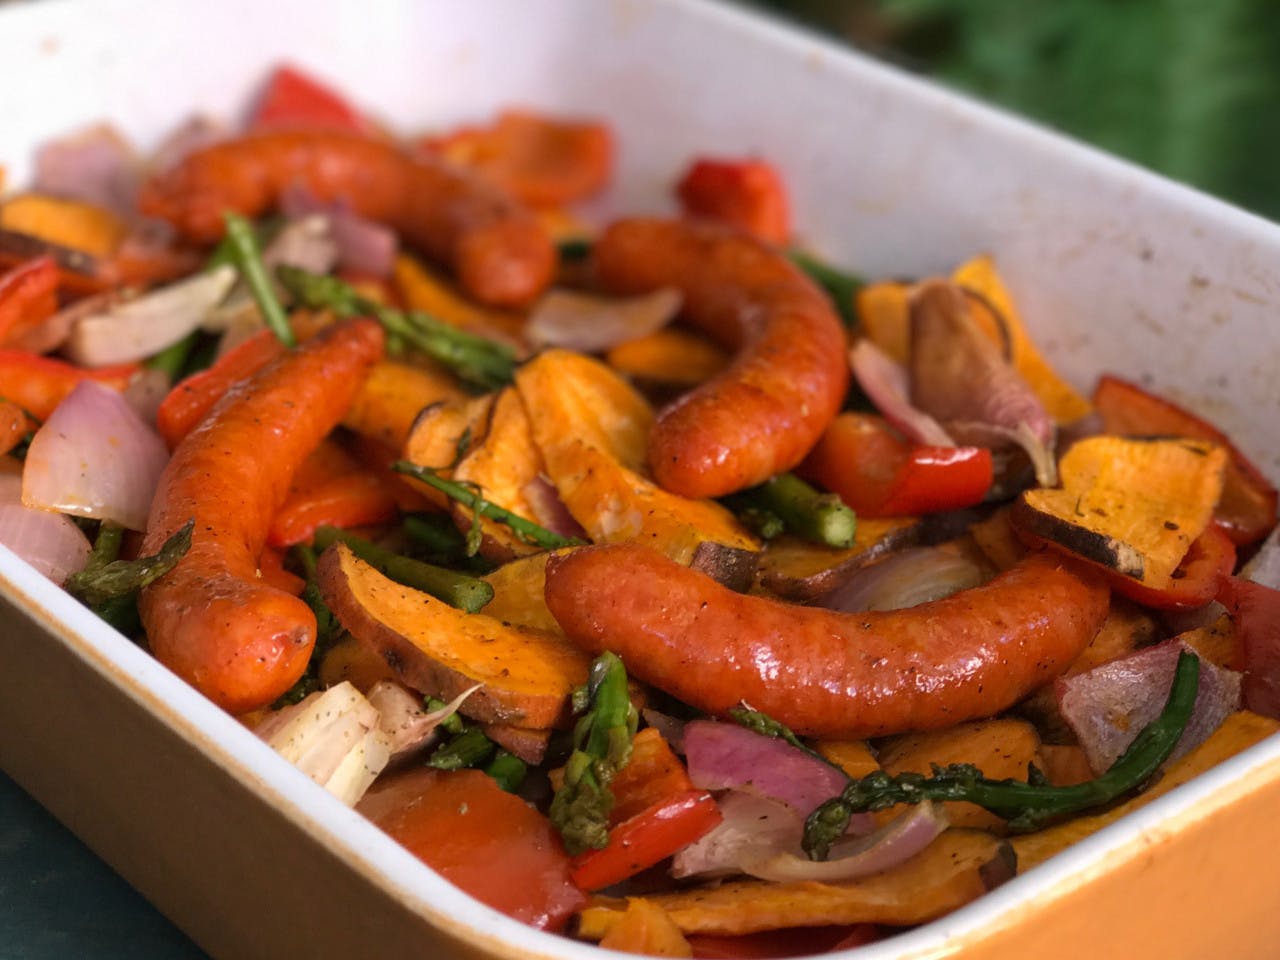 Nadine's sweet potato dish with spiced sausages